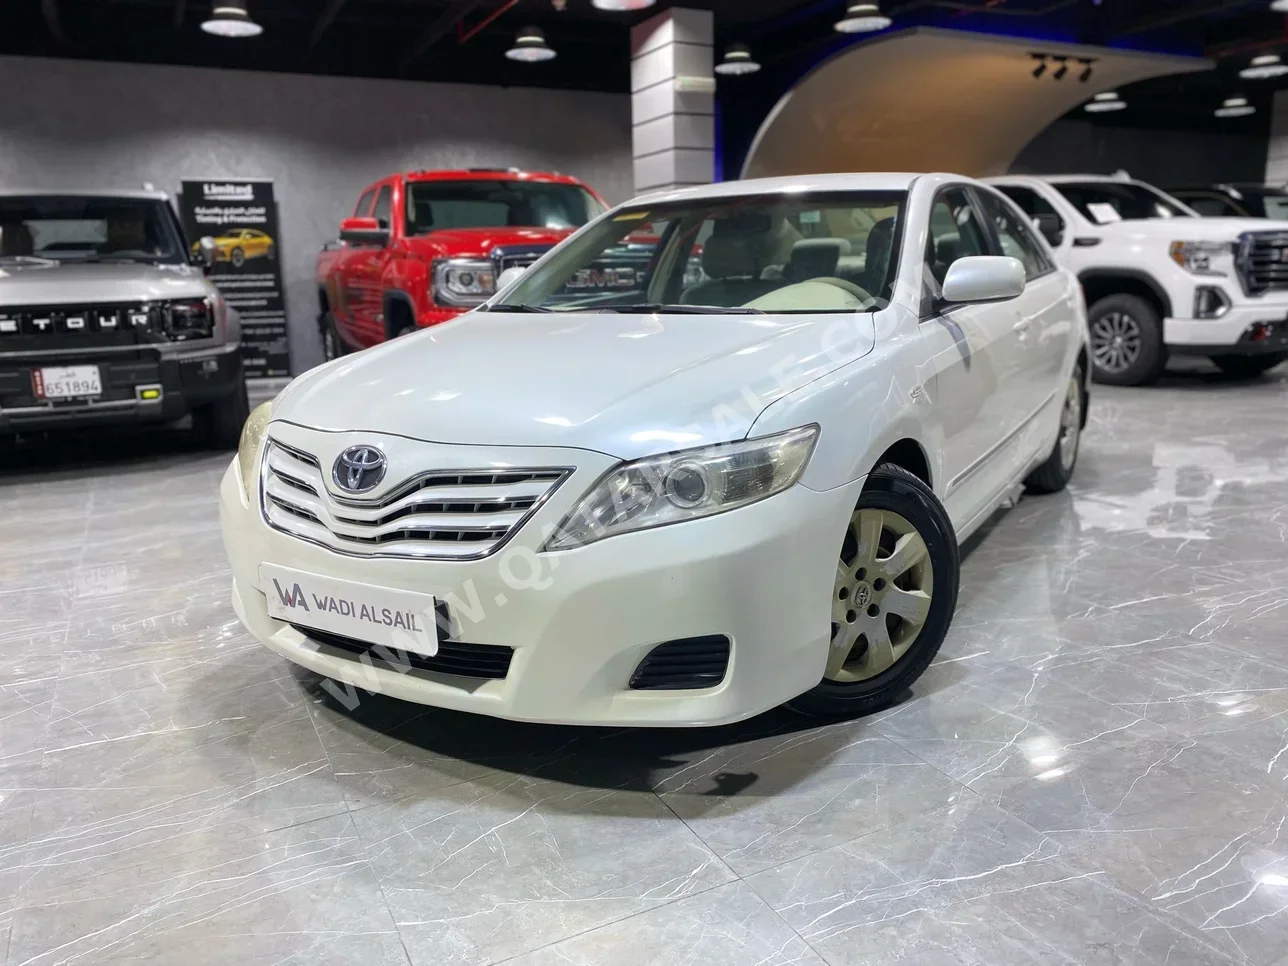 Toyota  Camry  GL  2010  Automatic  115,000 Km  4 Cylinder  Front Wheel Drive (FWD)  Sedan  White